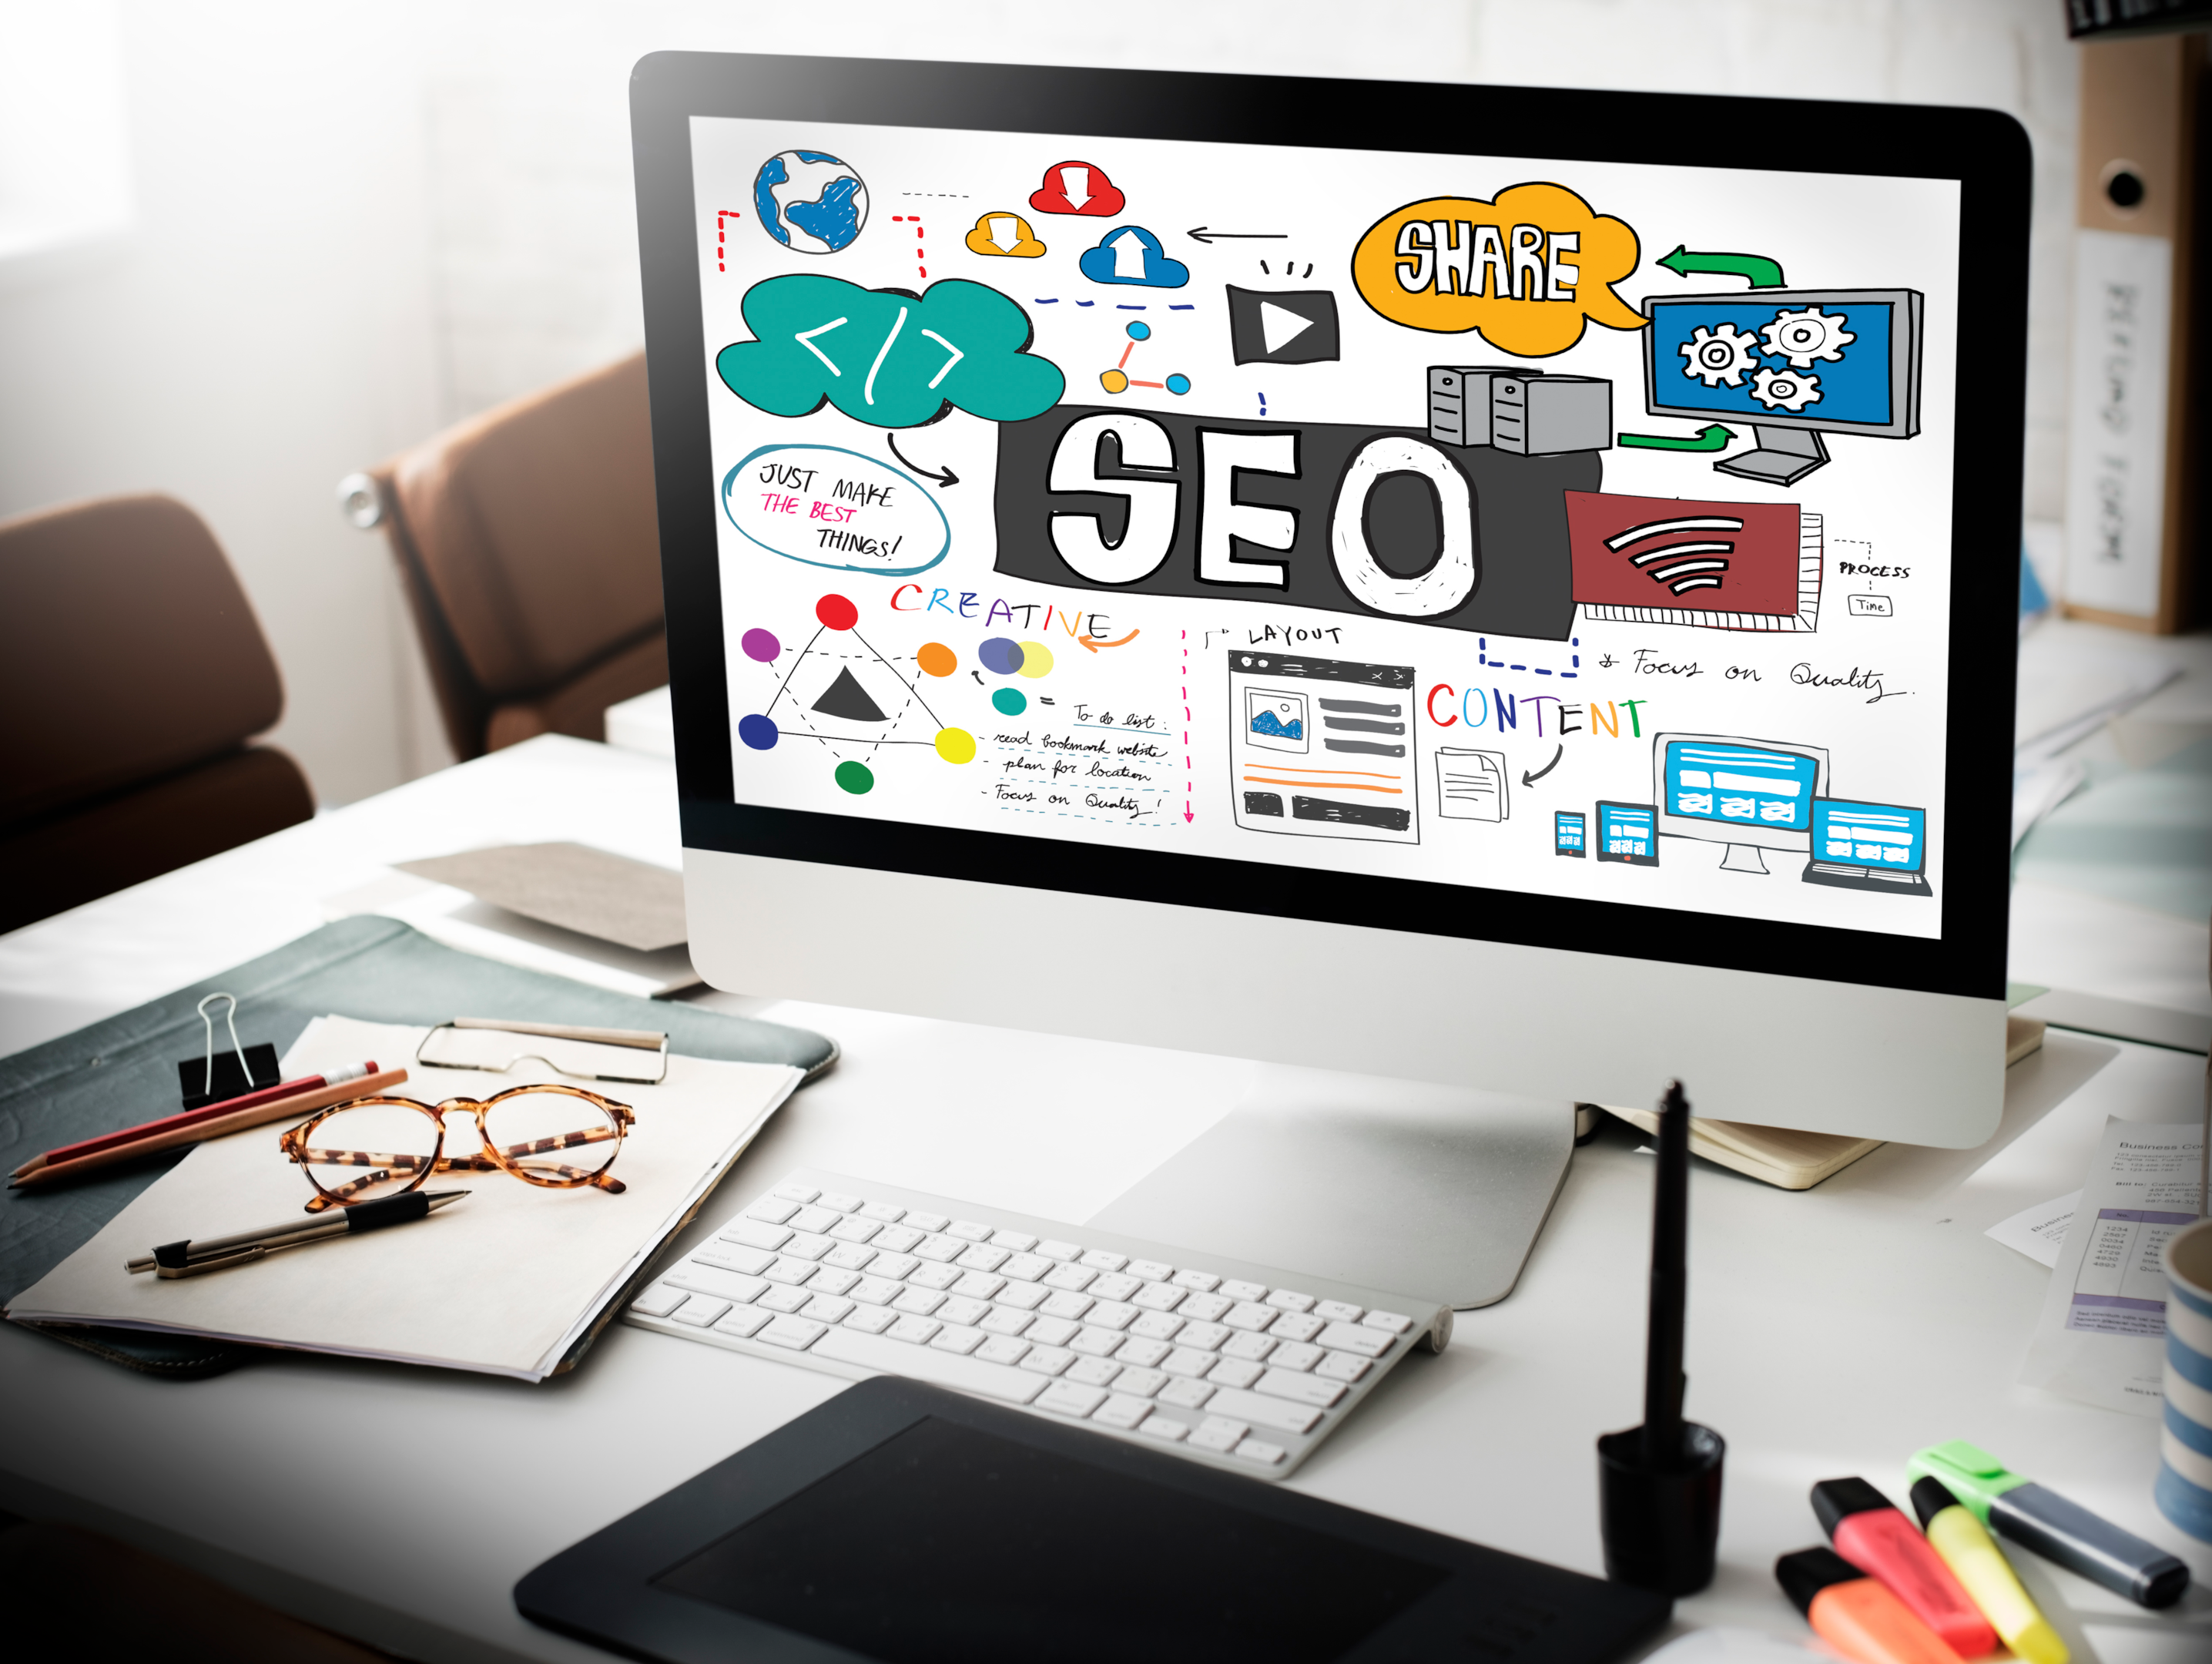 SEO and Content will always remain relevant digital marketing strategies